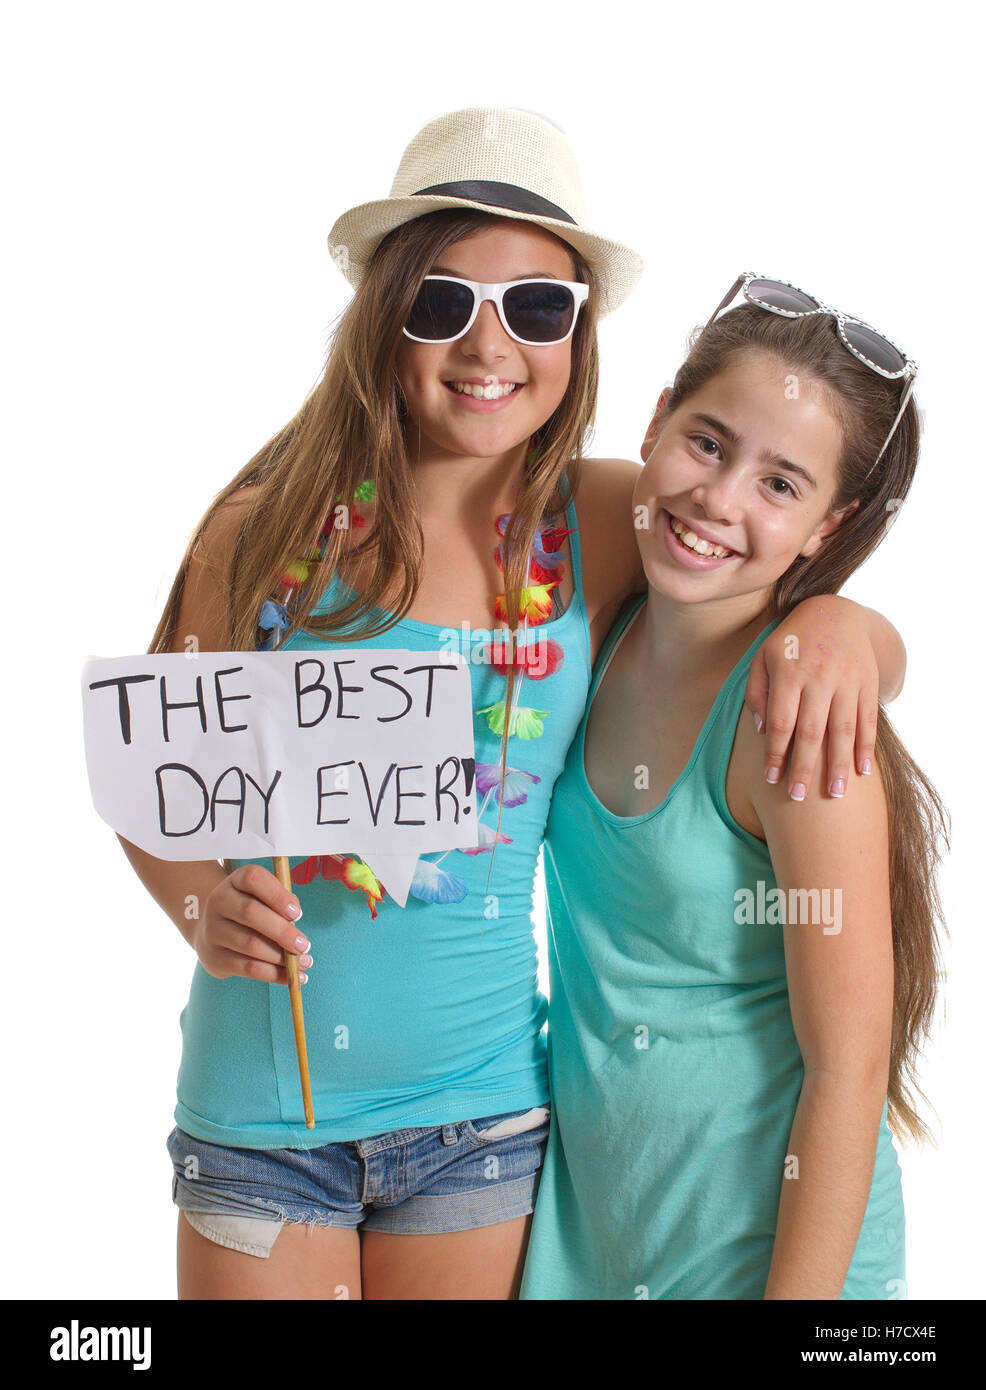 Two best friend girls in summer clothes having a great time holding a 'The Best Day Ever!' sign - isolated on white Stock Photo